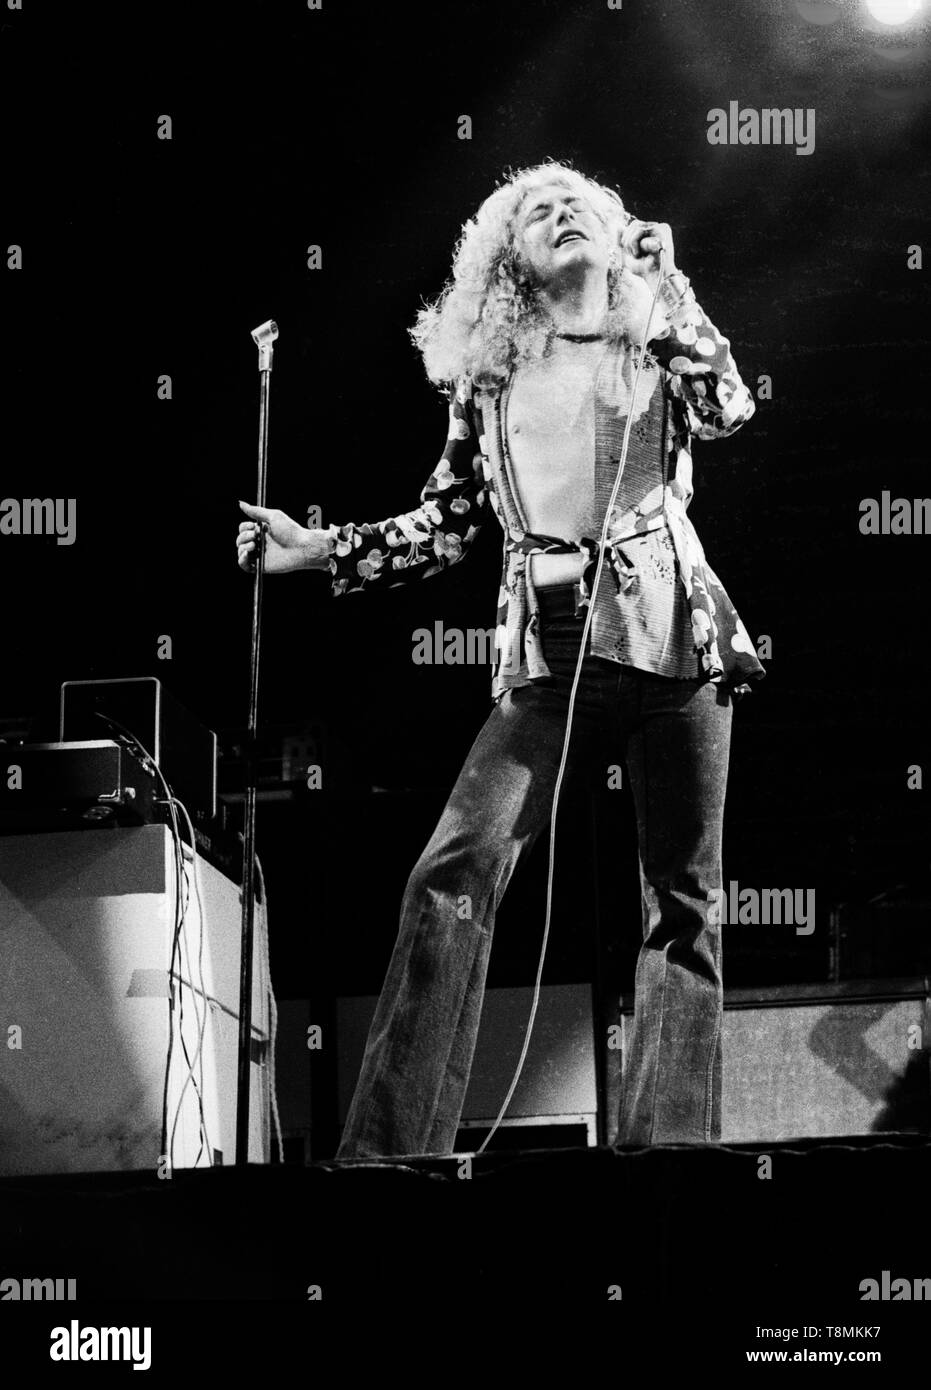 GERMANY - MARCH: Robert Plant from Led Zeppelin performs live on stage in  Germany in March 1973 (Photo by vCaem/Gijsbert Hanekroot/Redferns Stock  Photo - Alamy